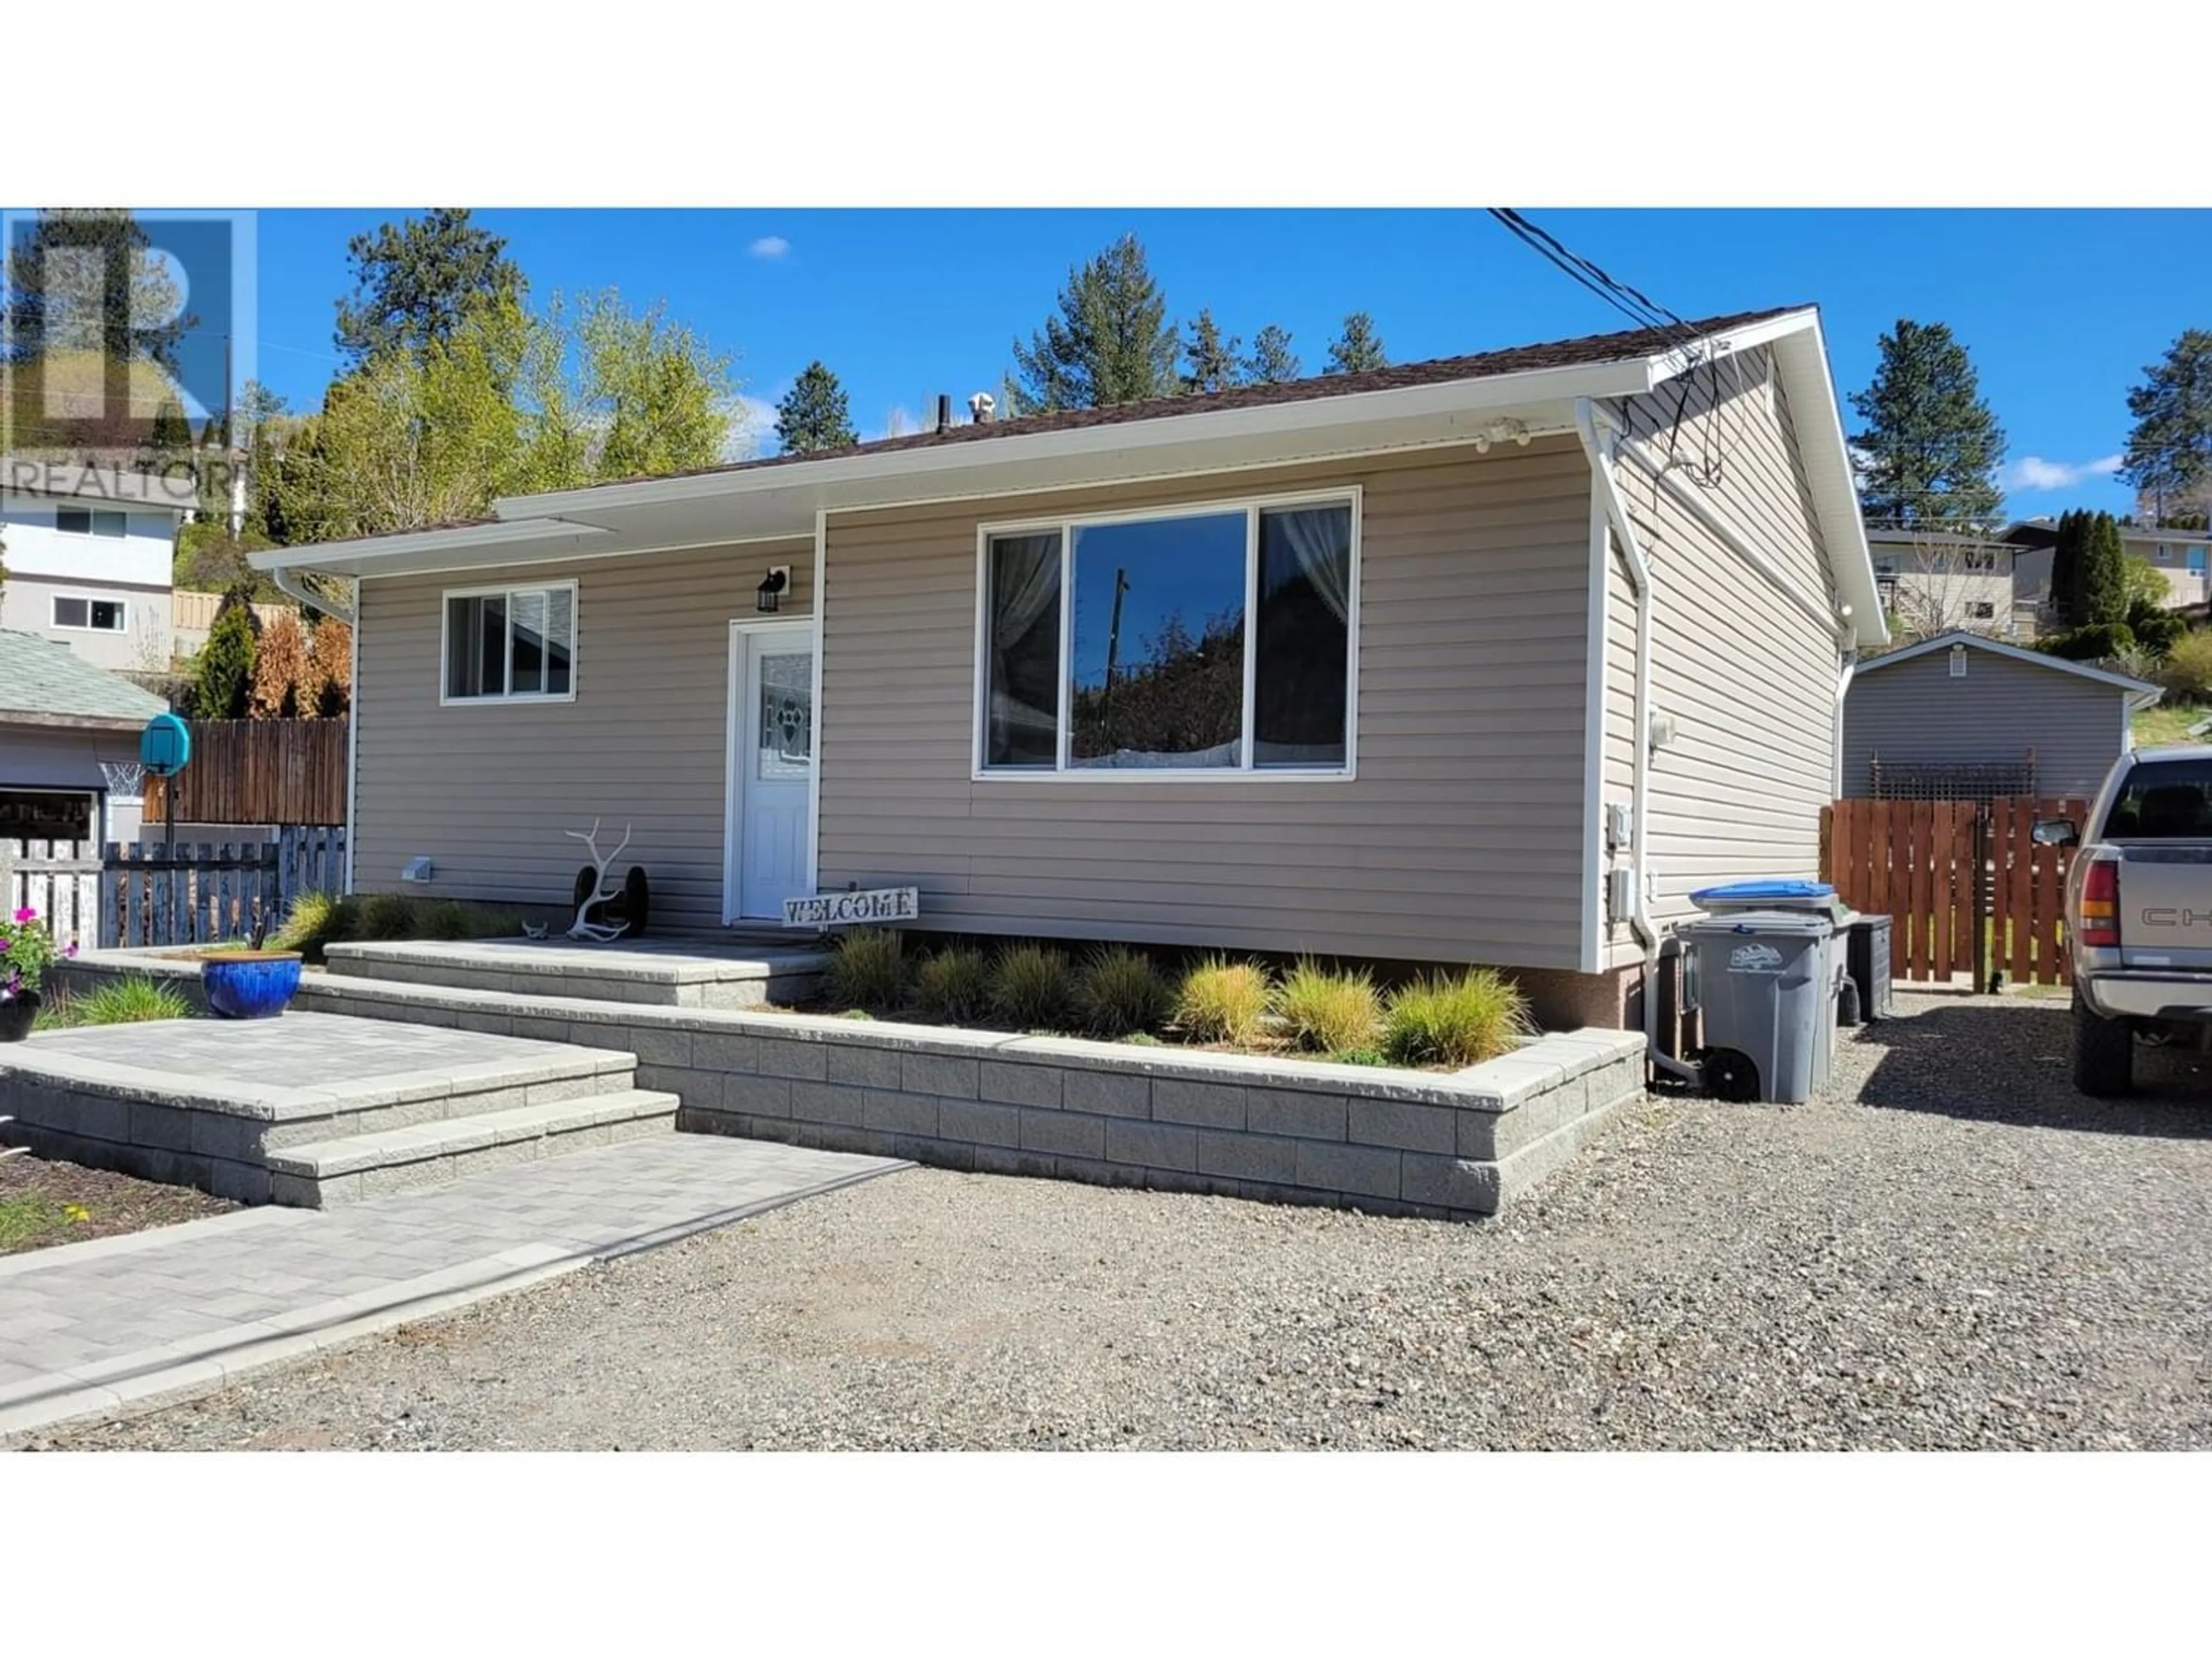 Home with vinyl exterior material for 5678 NORLAND DRIVE, Kamloops British Columbia V2C5H9